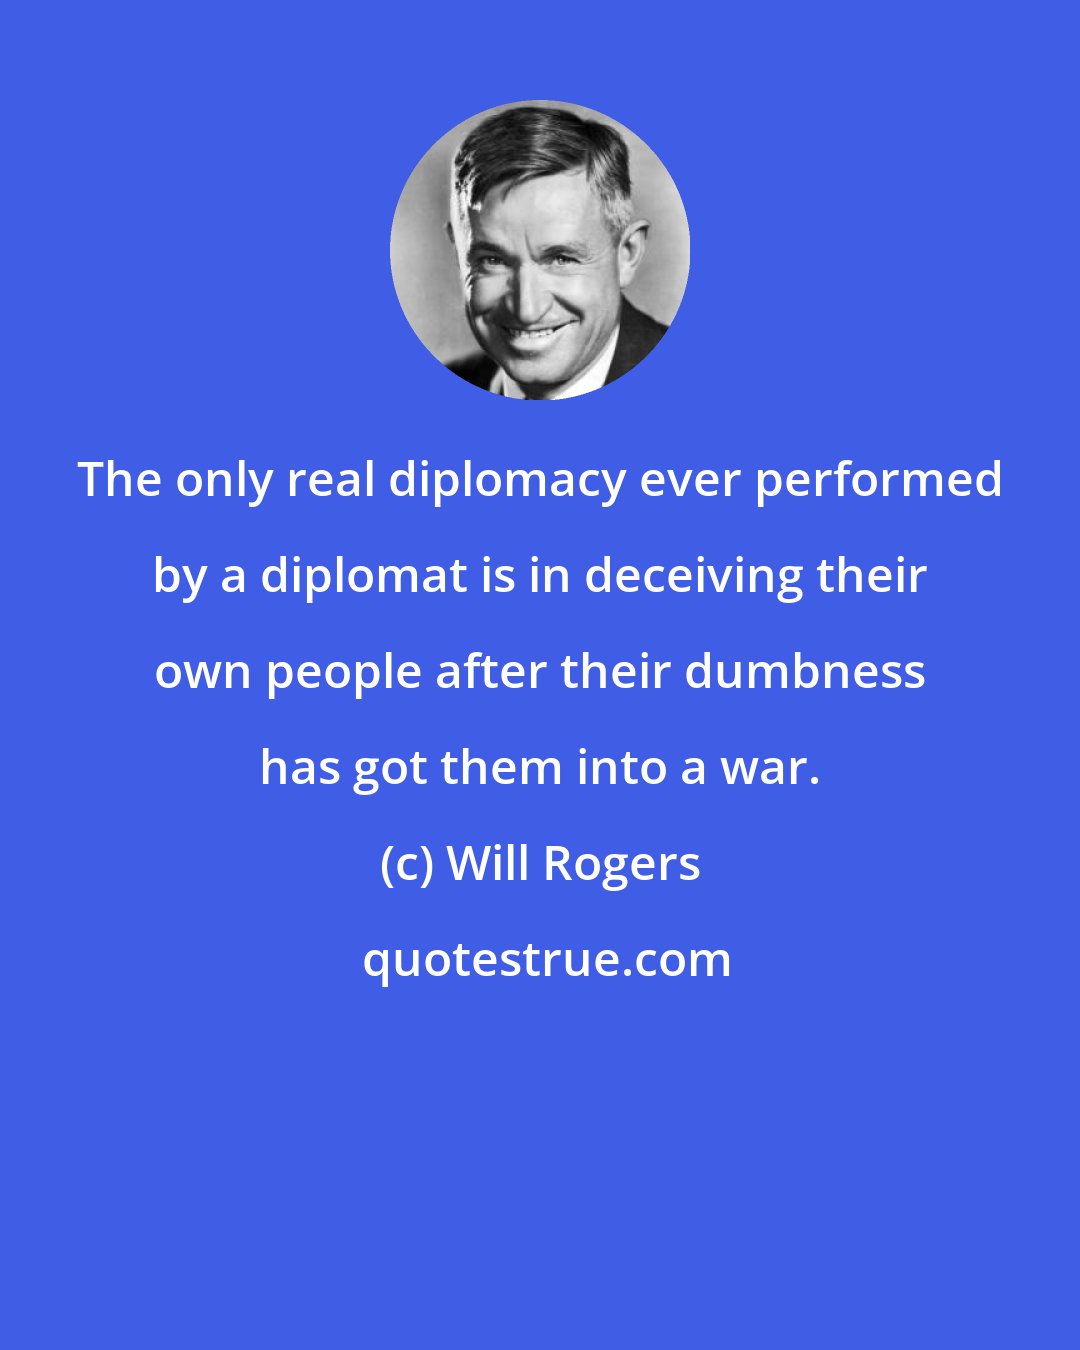 Will Rogers: The only real diplomacy ever performed by a diplomat is in deceiving their own people after their dumbness has got them into a war.